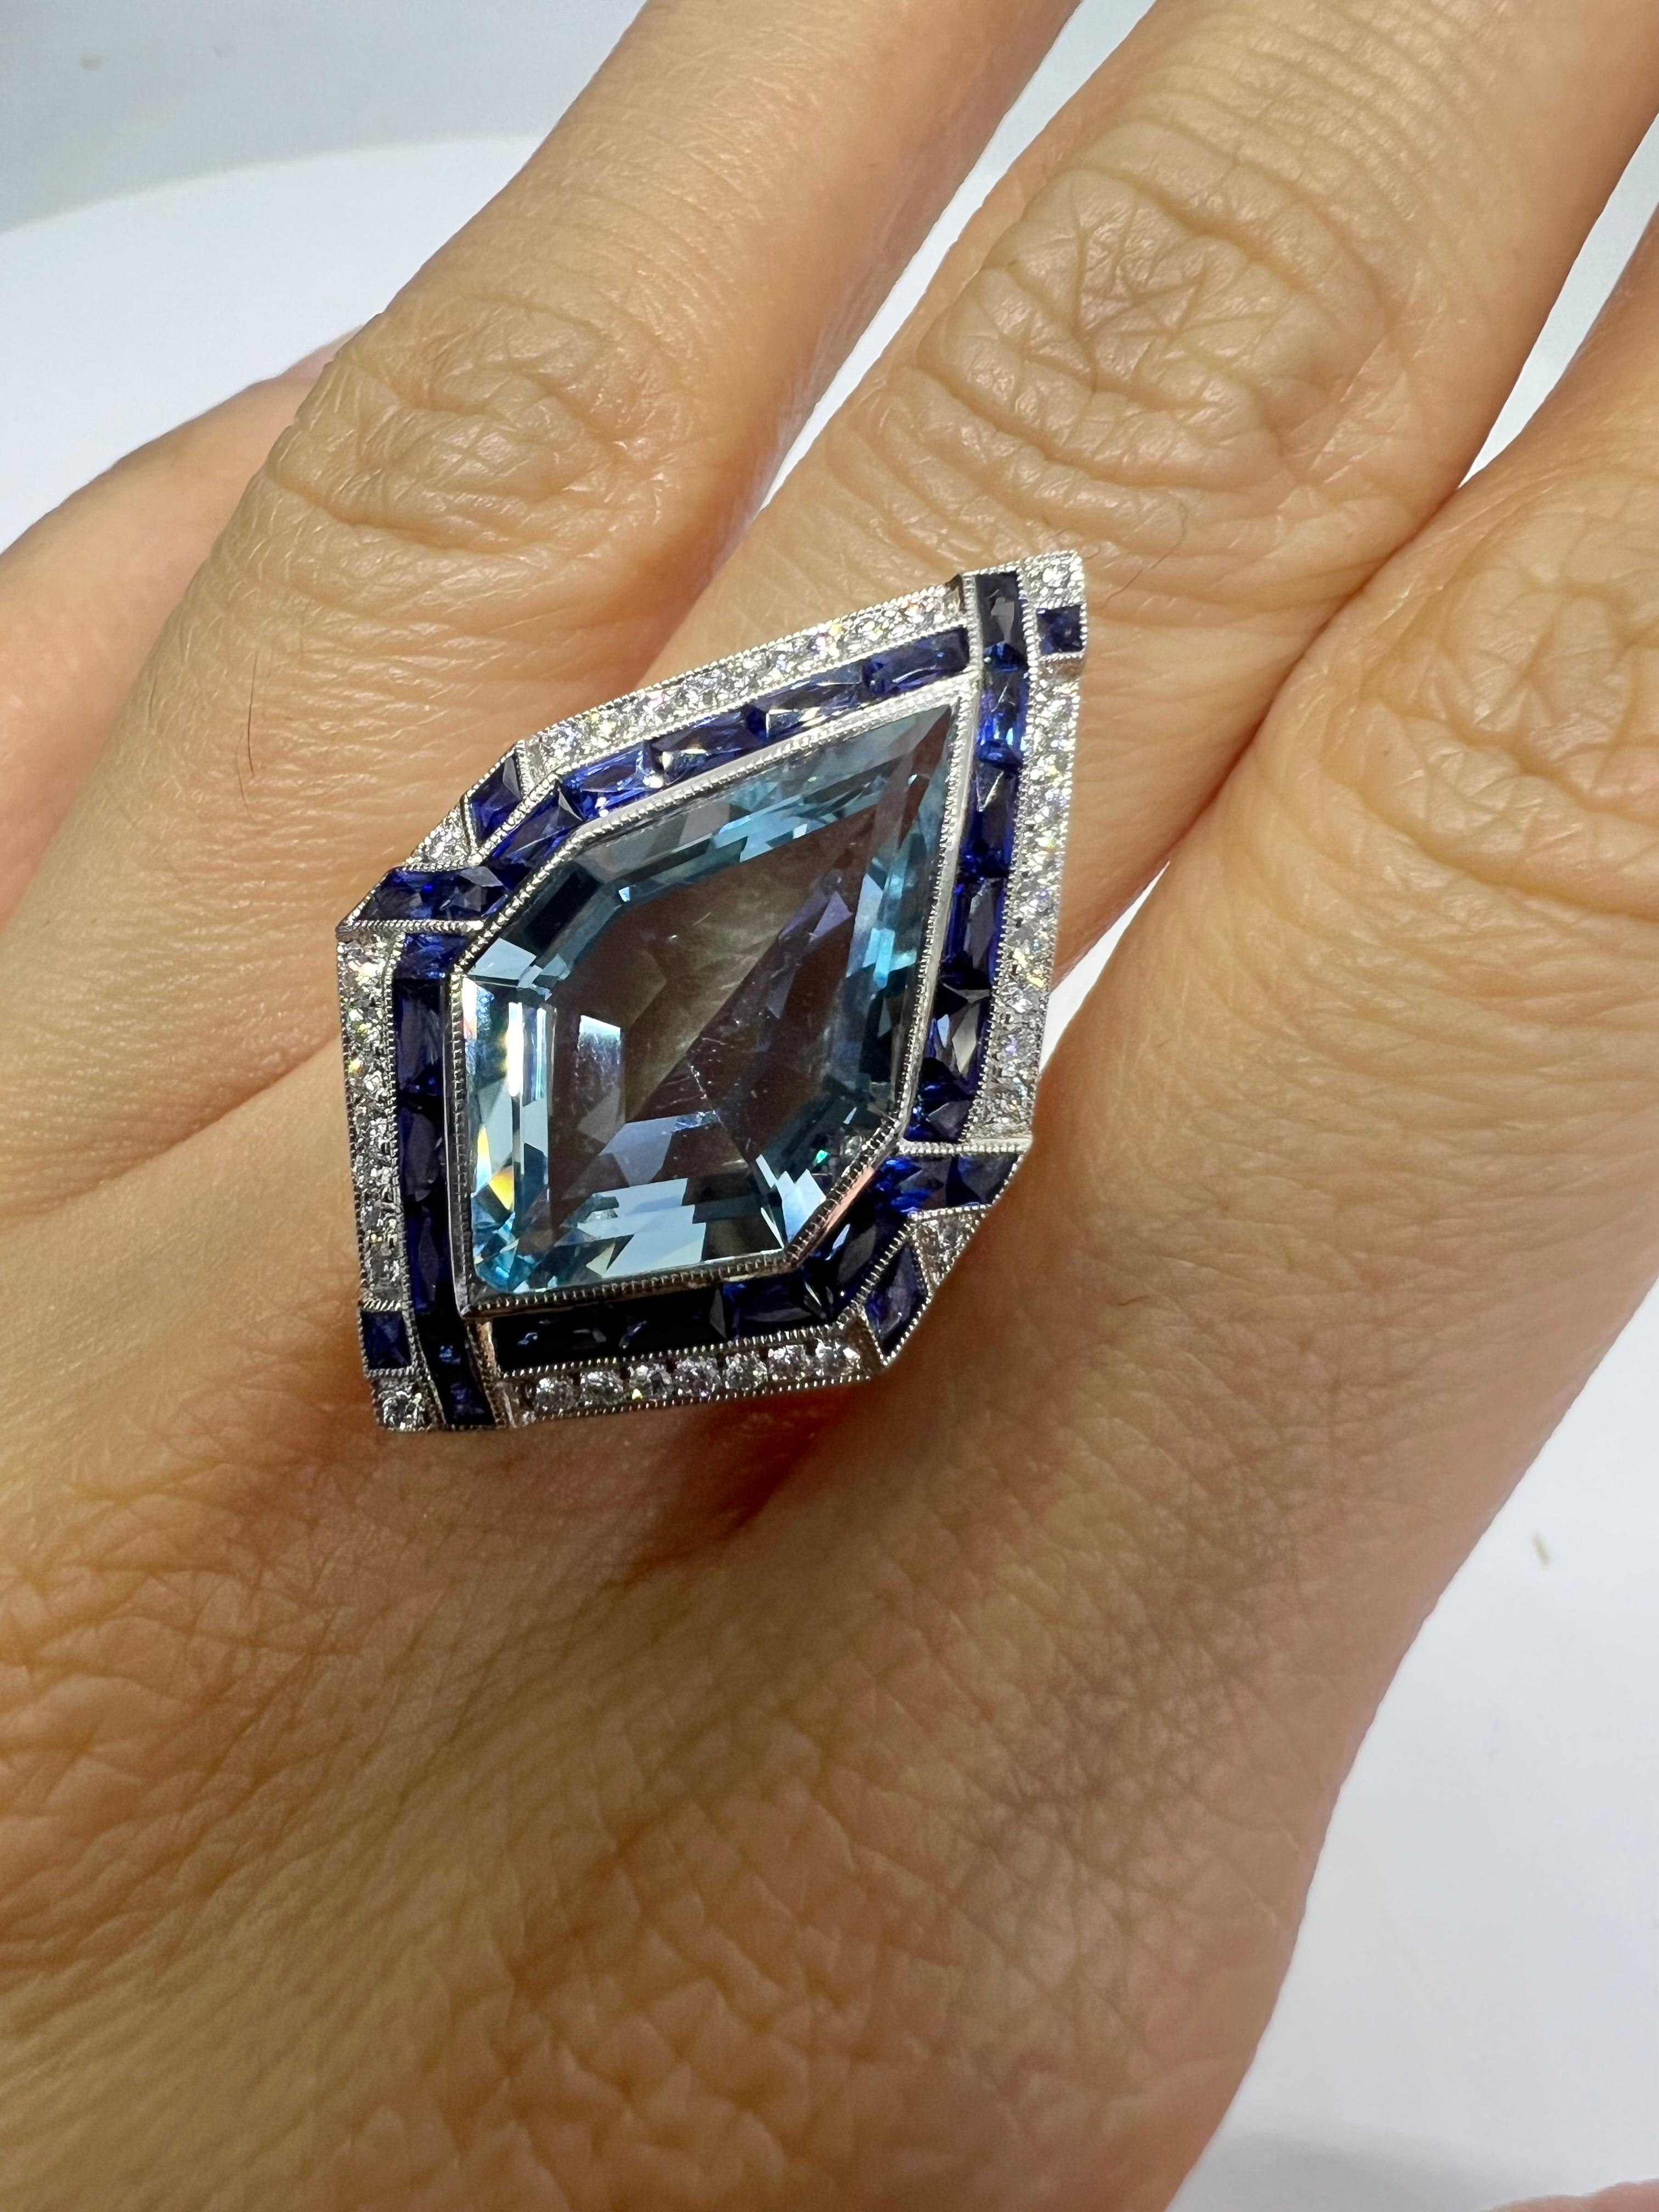 A platinum ring with 4.83 carat aquamarine, 1.10 carat sapphire and 0.41 carat diamond.

Sophia D by Joseph Dardashti LTD has been known worldwide for 35 years and are inspired by classic Art Deco design that merges with modern manufacturing